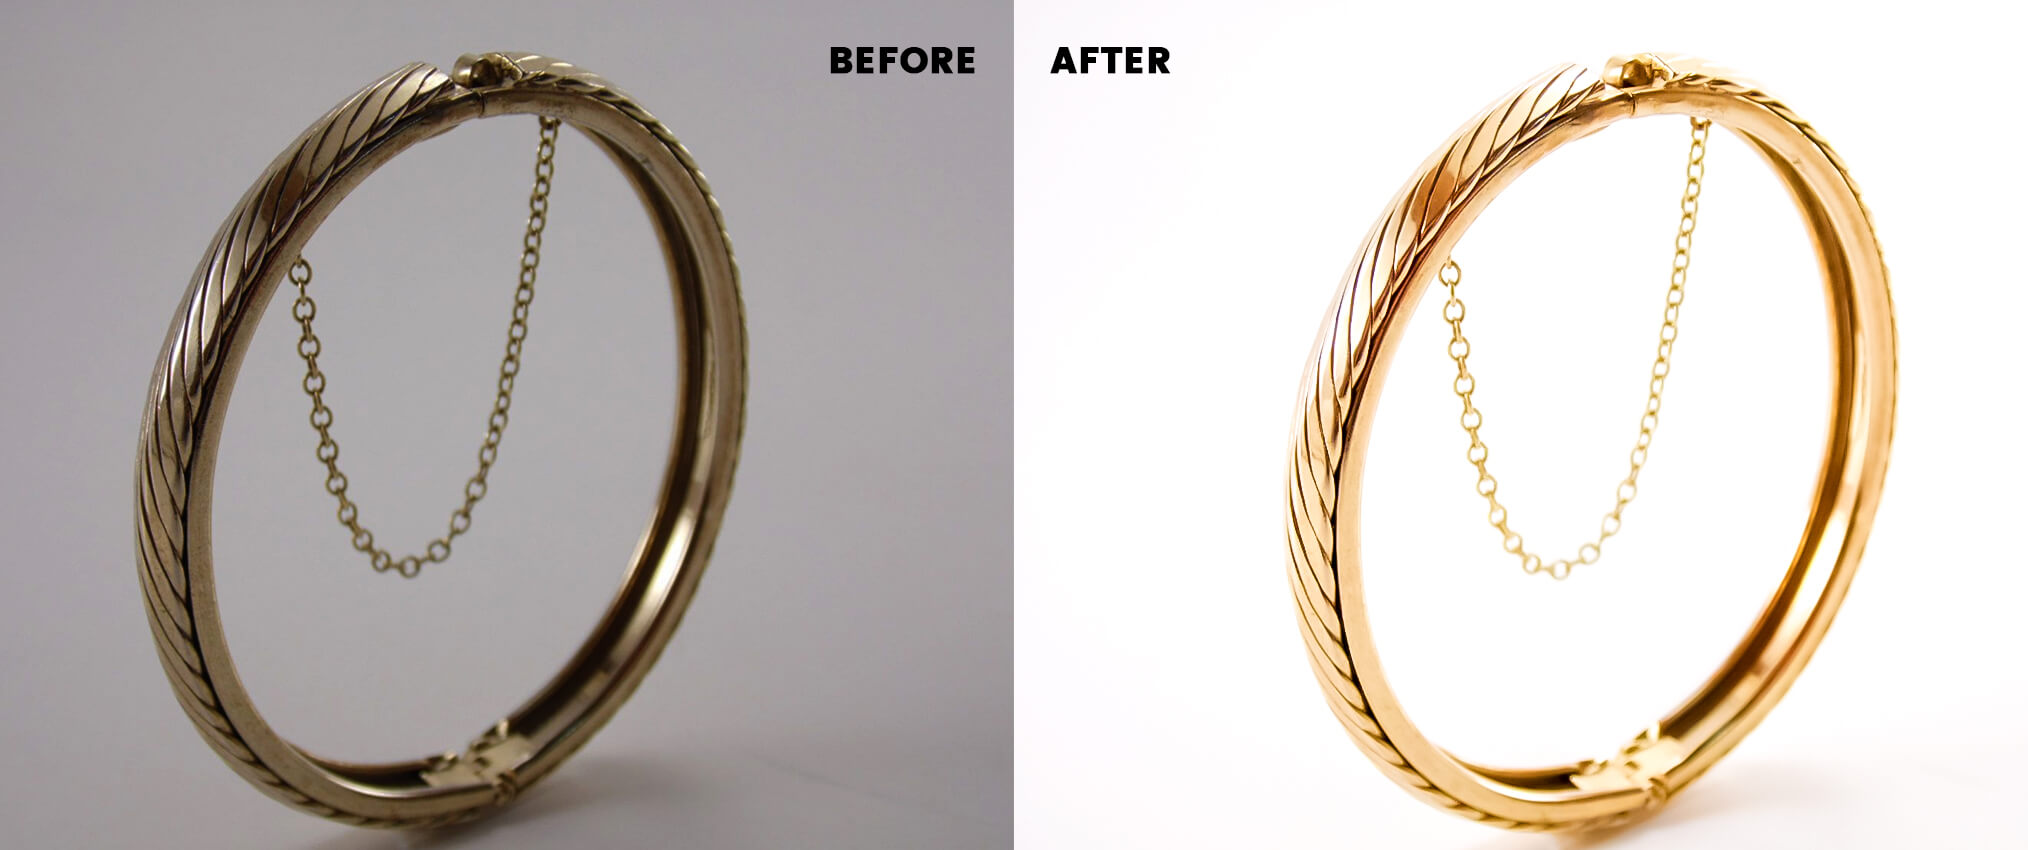 10 Highly Effective Jewelry Retouching Tips to Increase Your Sales